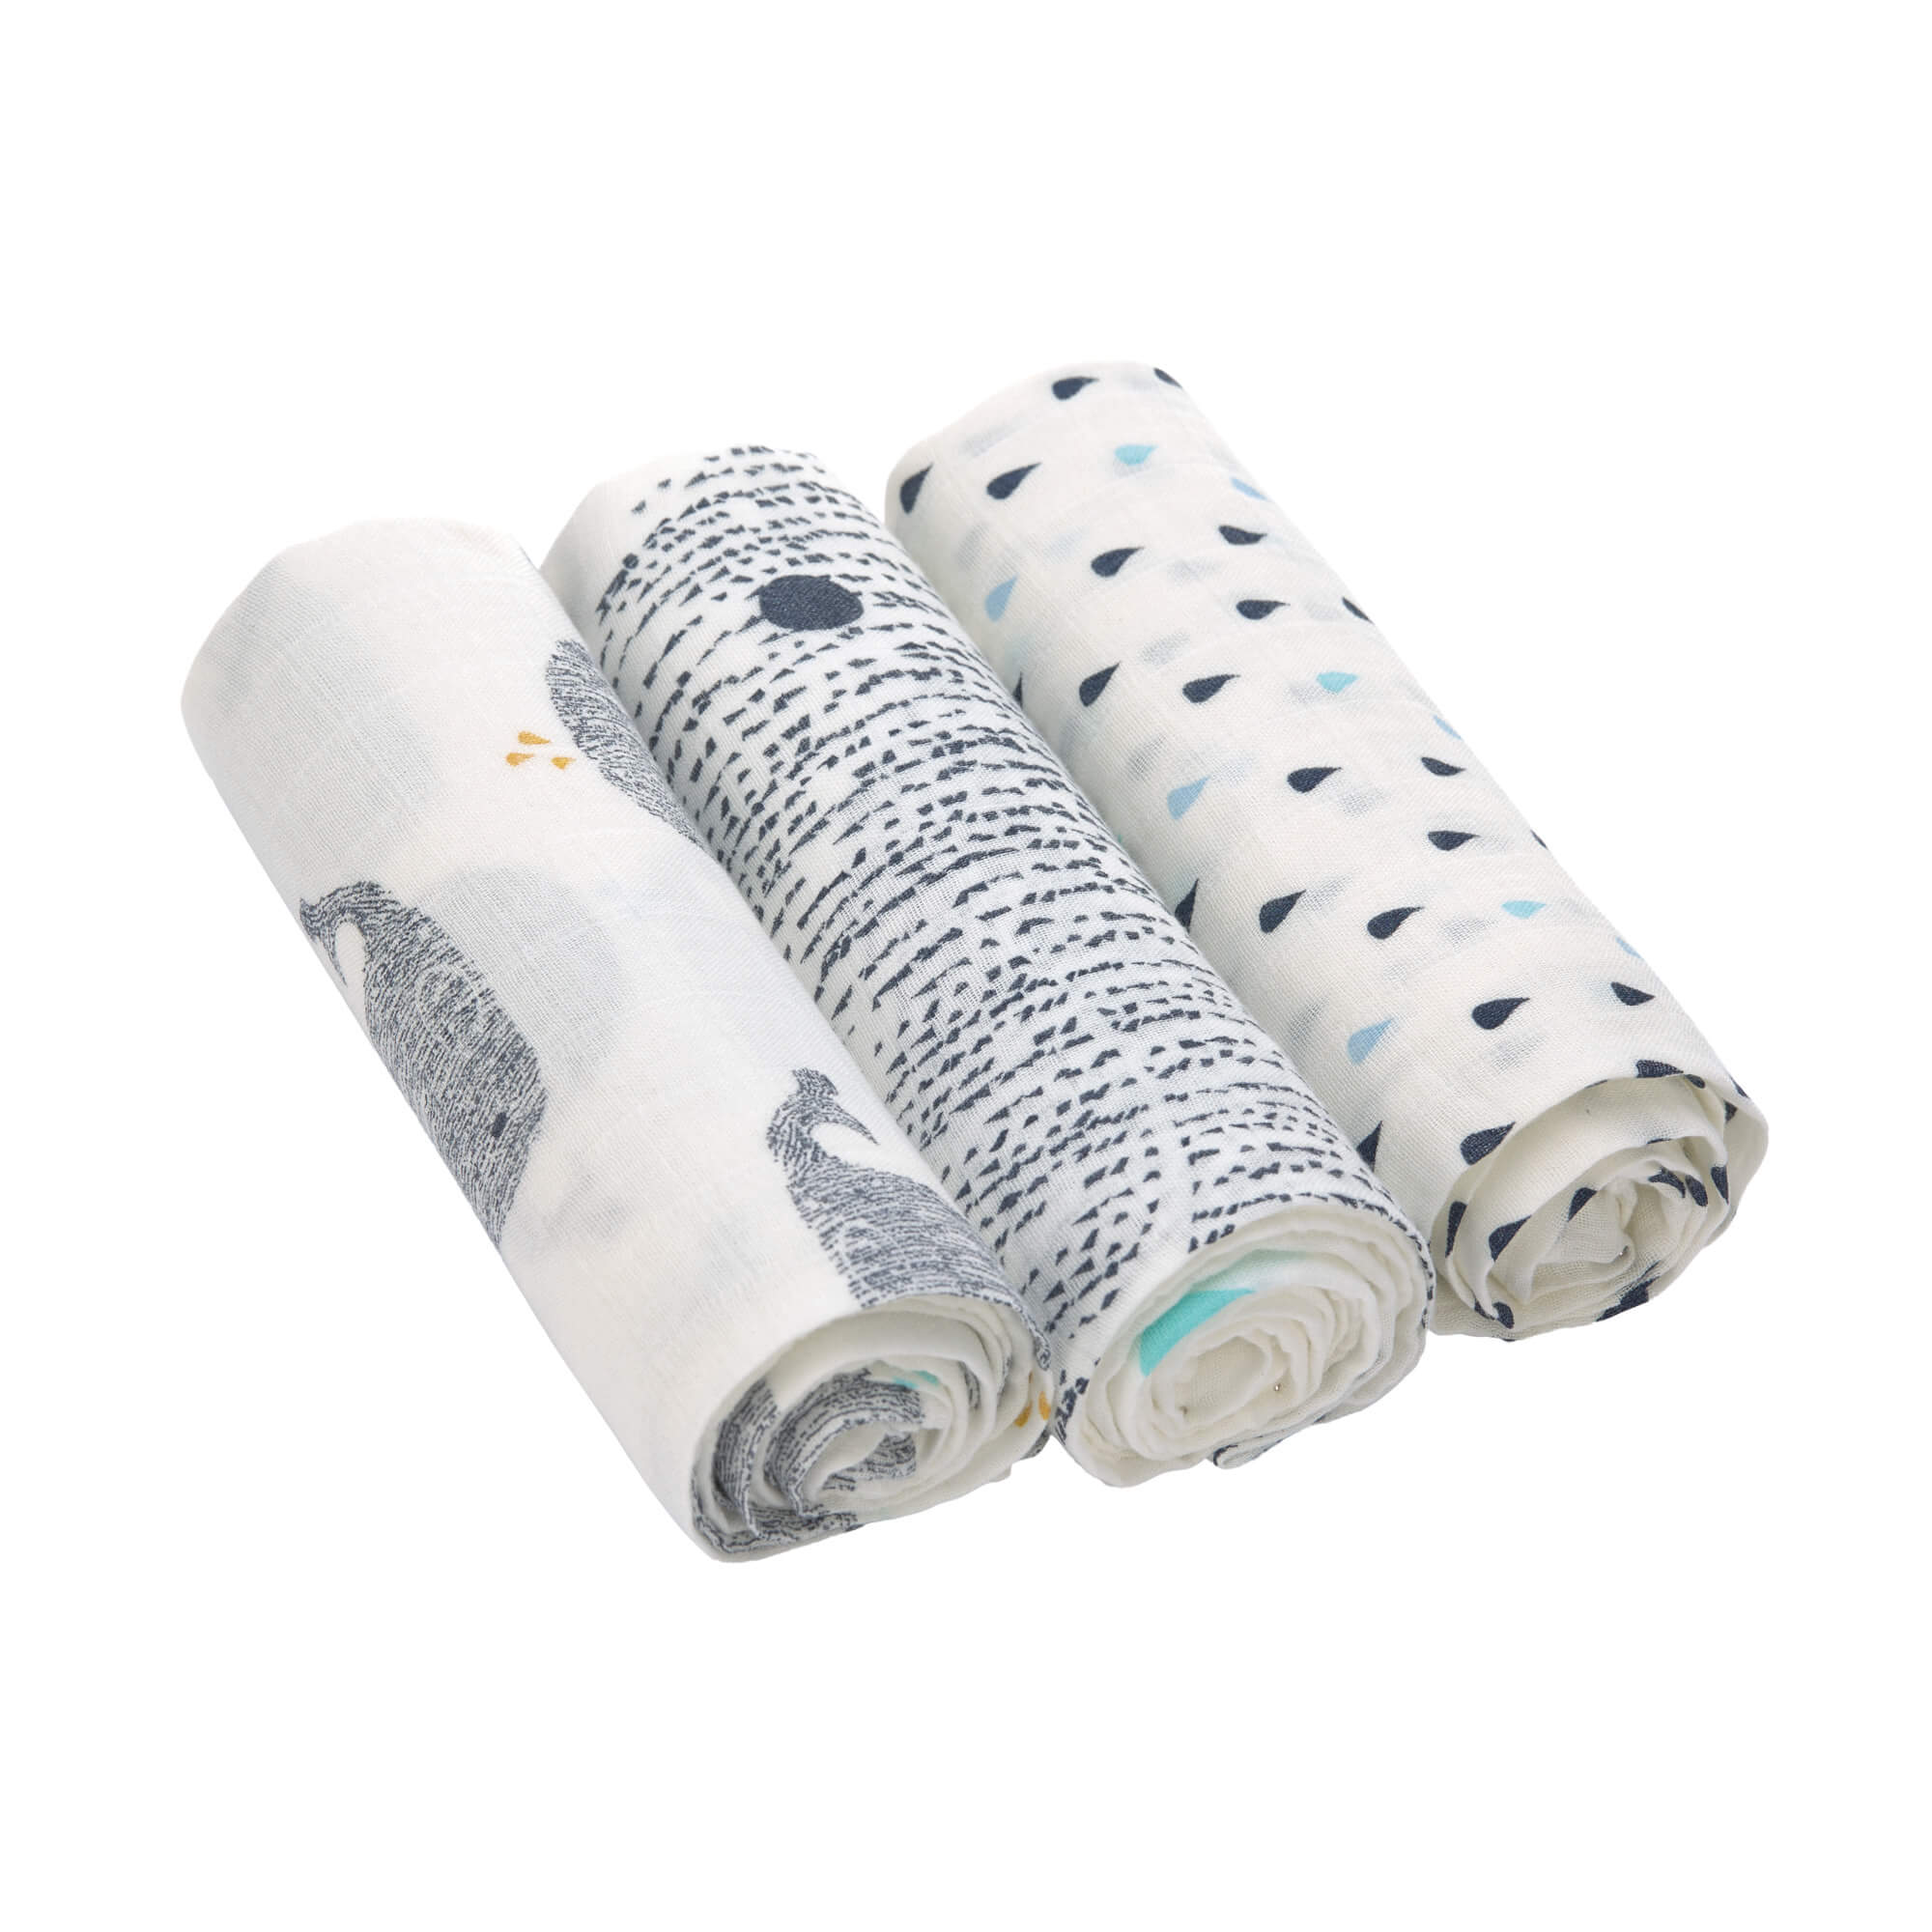 Lässig - Large Bamboo Swaddle Cloths, 3 pc - Little Water Whale (291312001452)